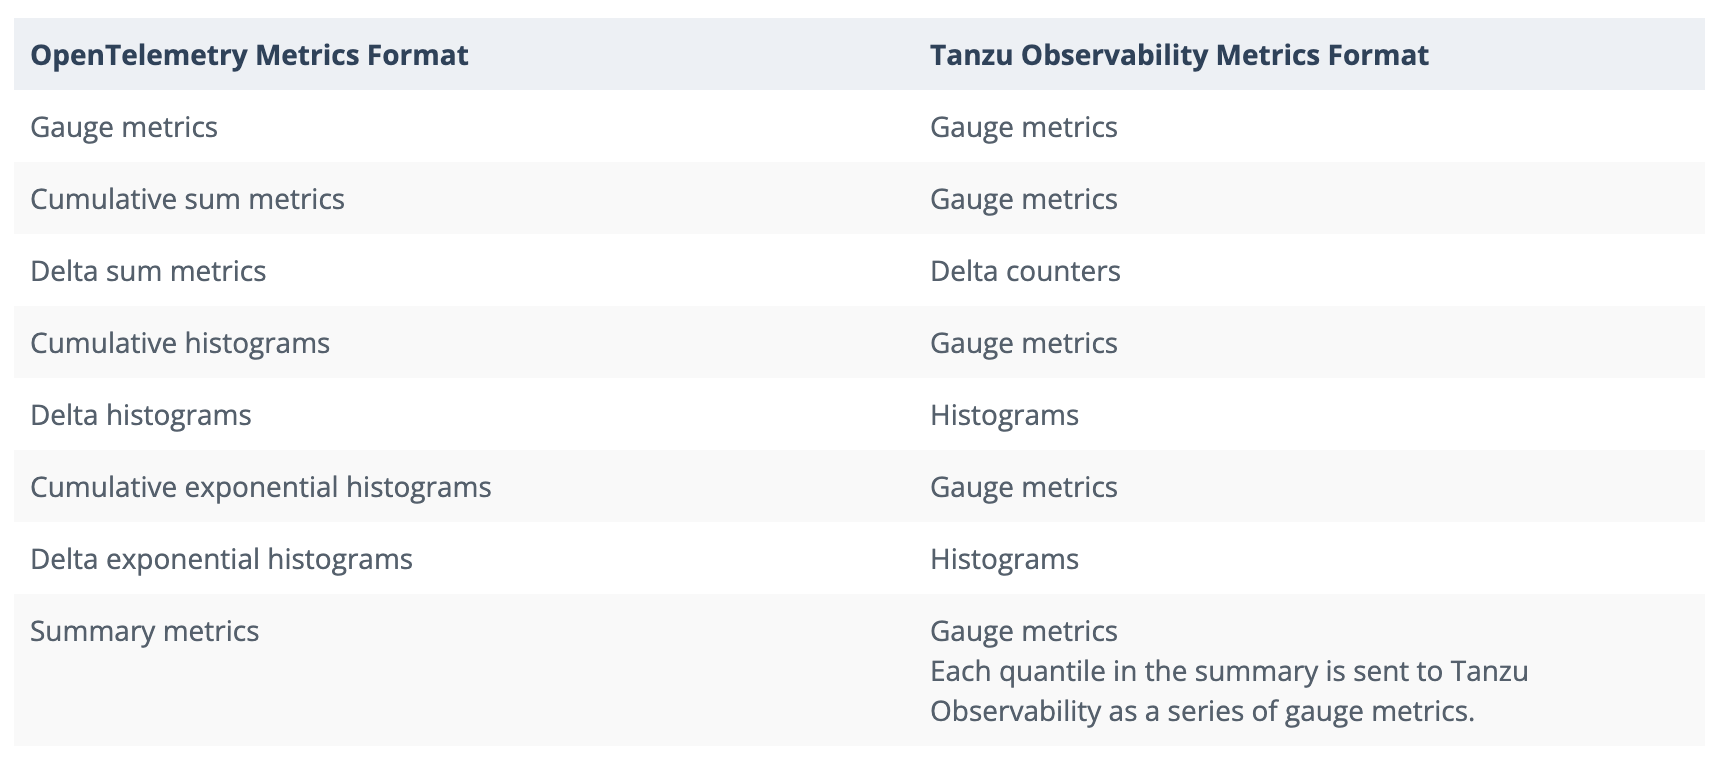 There is a table that shows how the OpenTelemetry metrics are converted to the Wavefront metrics format